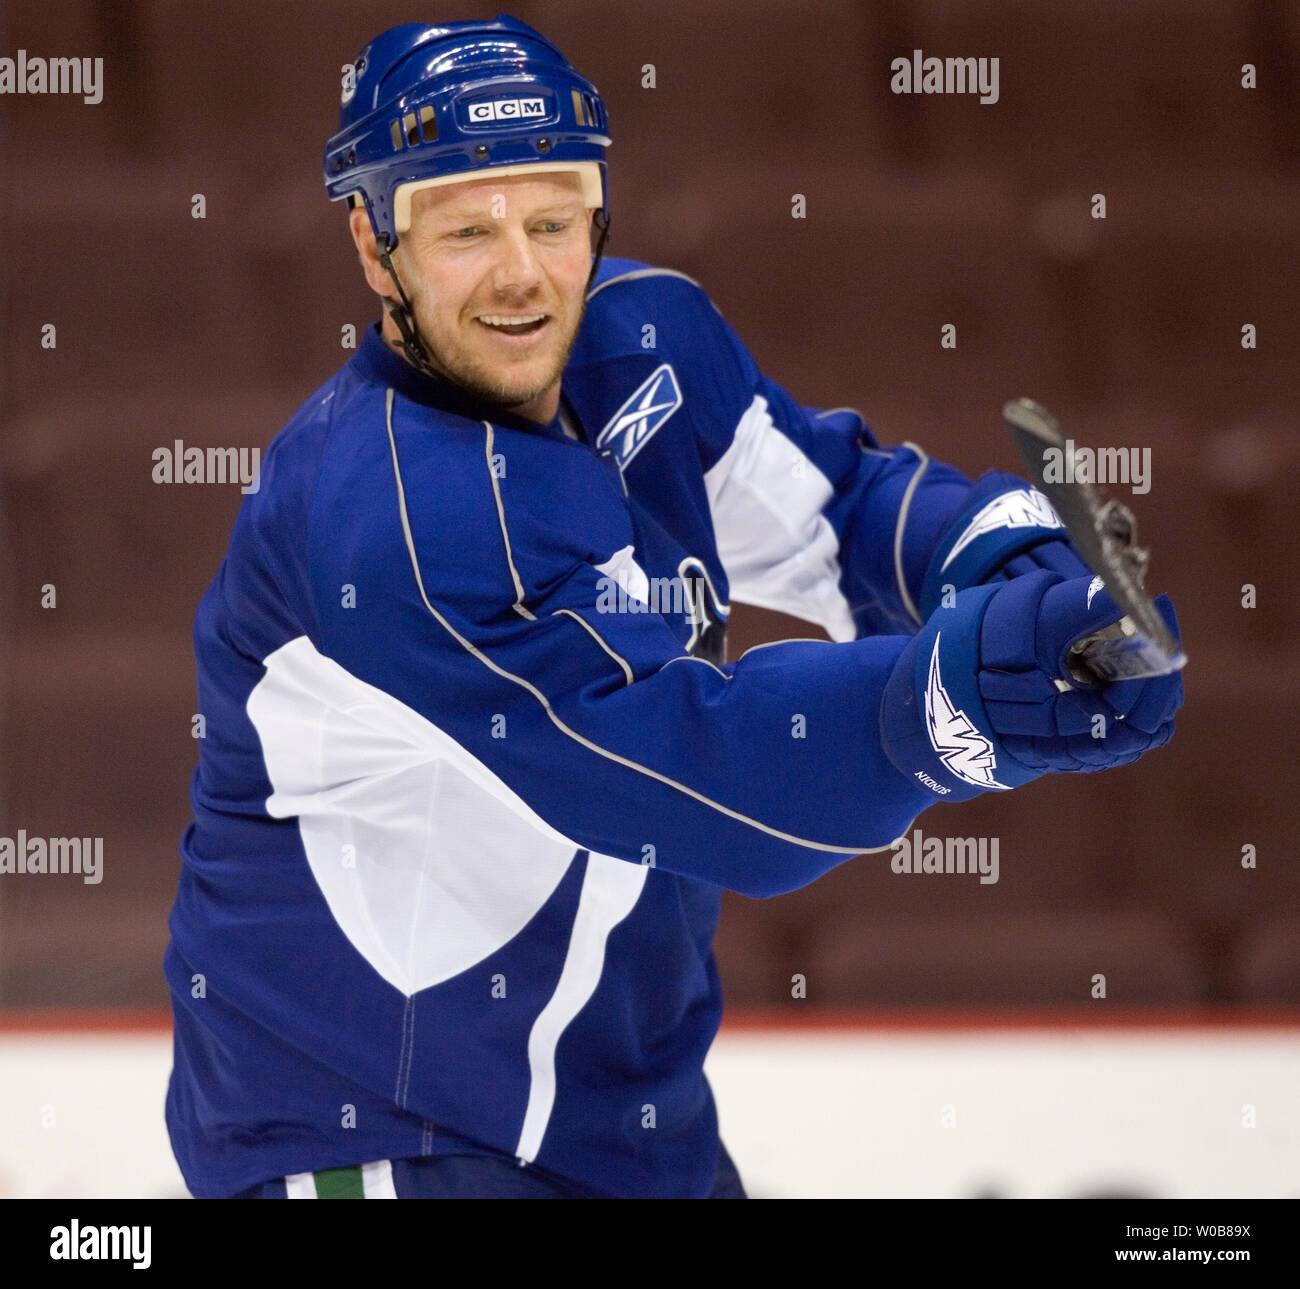 Mats Sundin attends practice with the Vancouver Canucks, his first time  back with the team after signing as a free agent, at GM Place in Vancouver,  British Columbia, December 30, 2008. (UPI